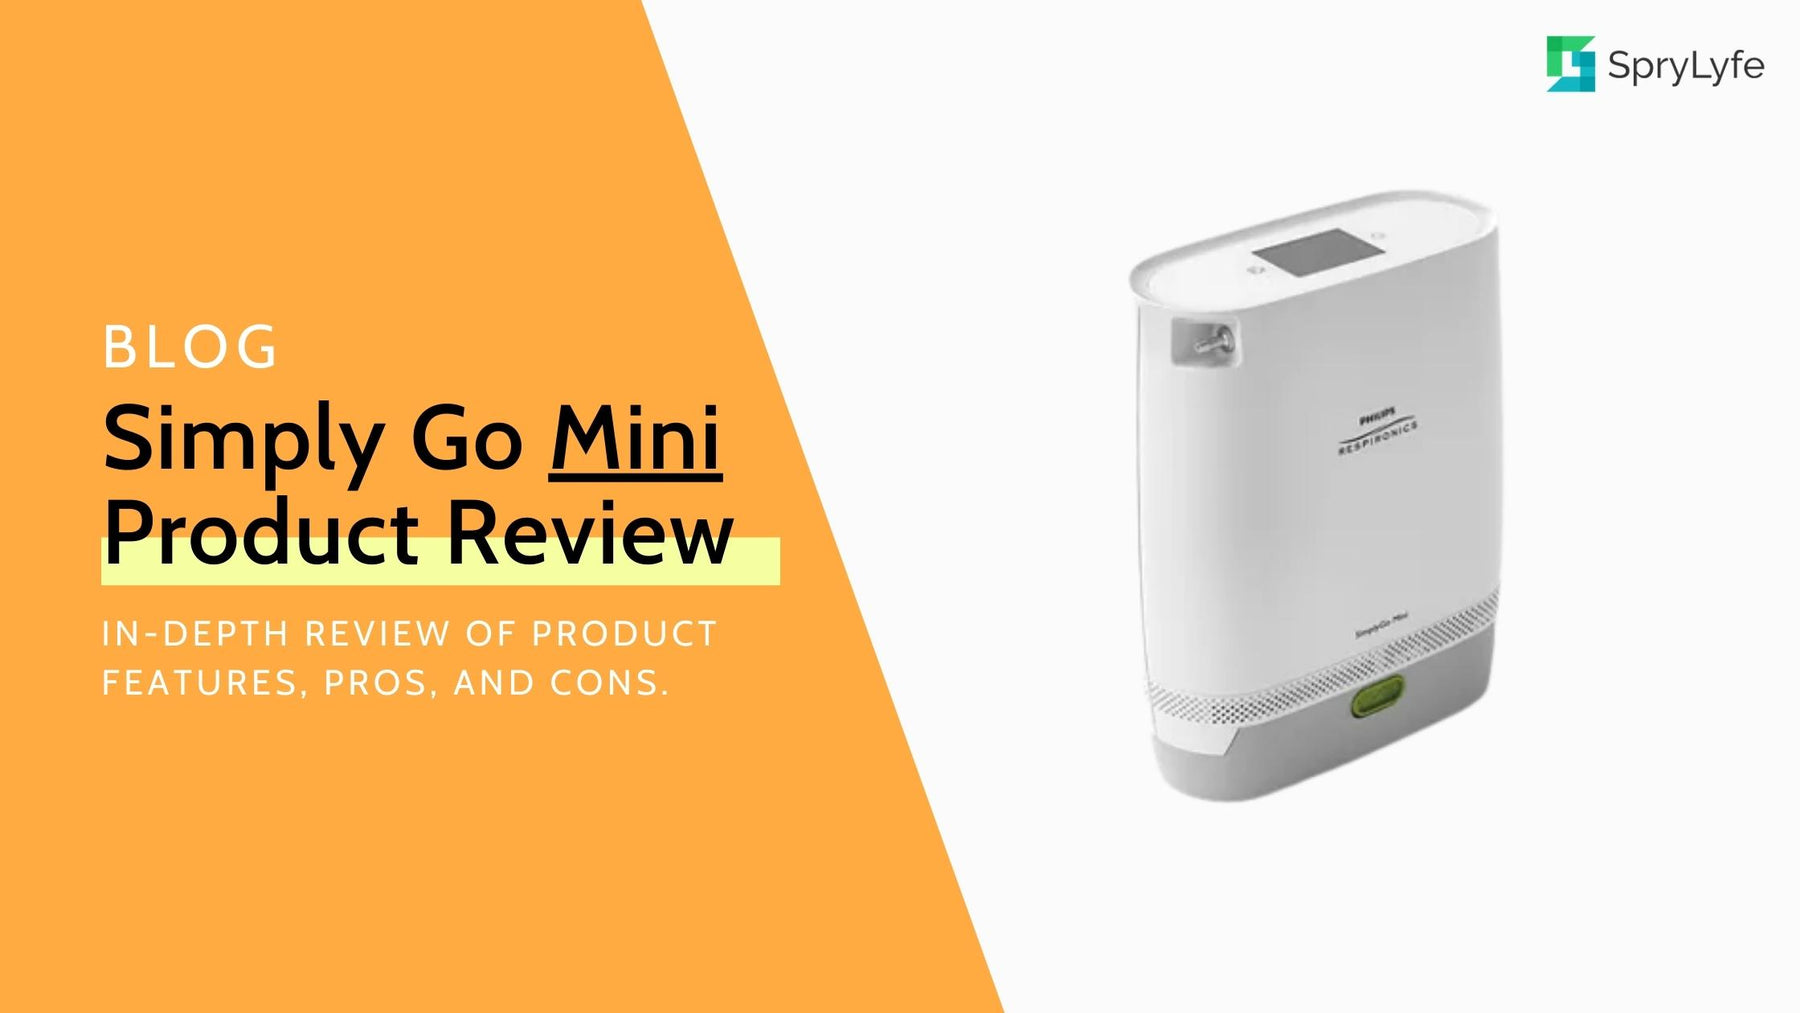 Philips Respironics SimplyGo Mini Portable Oxygen Concentrator Review